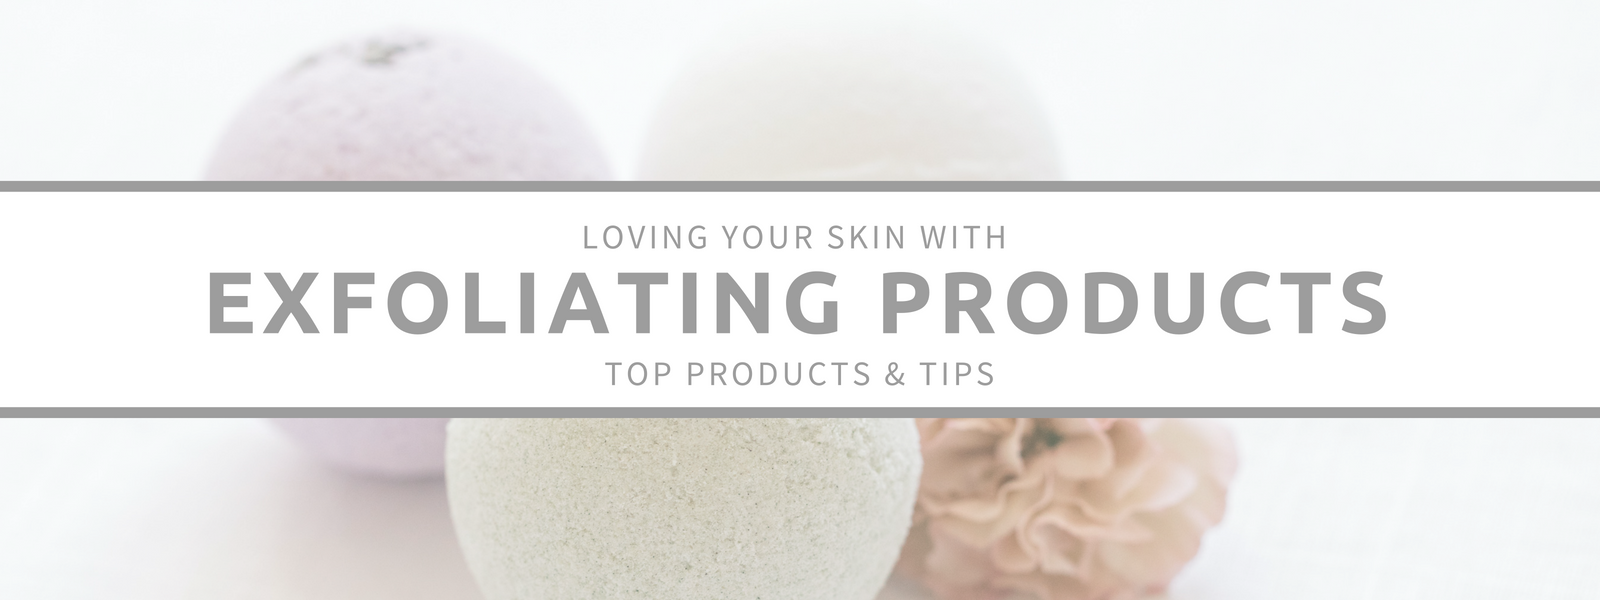 EXFOLIATING PRODUCTS